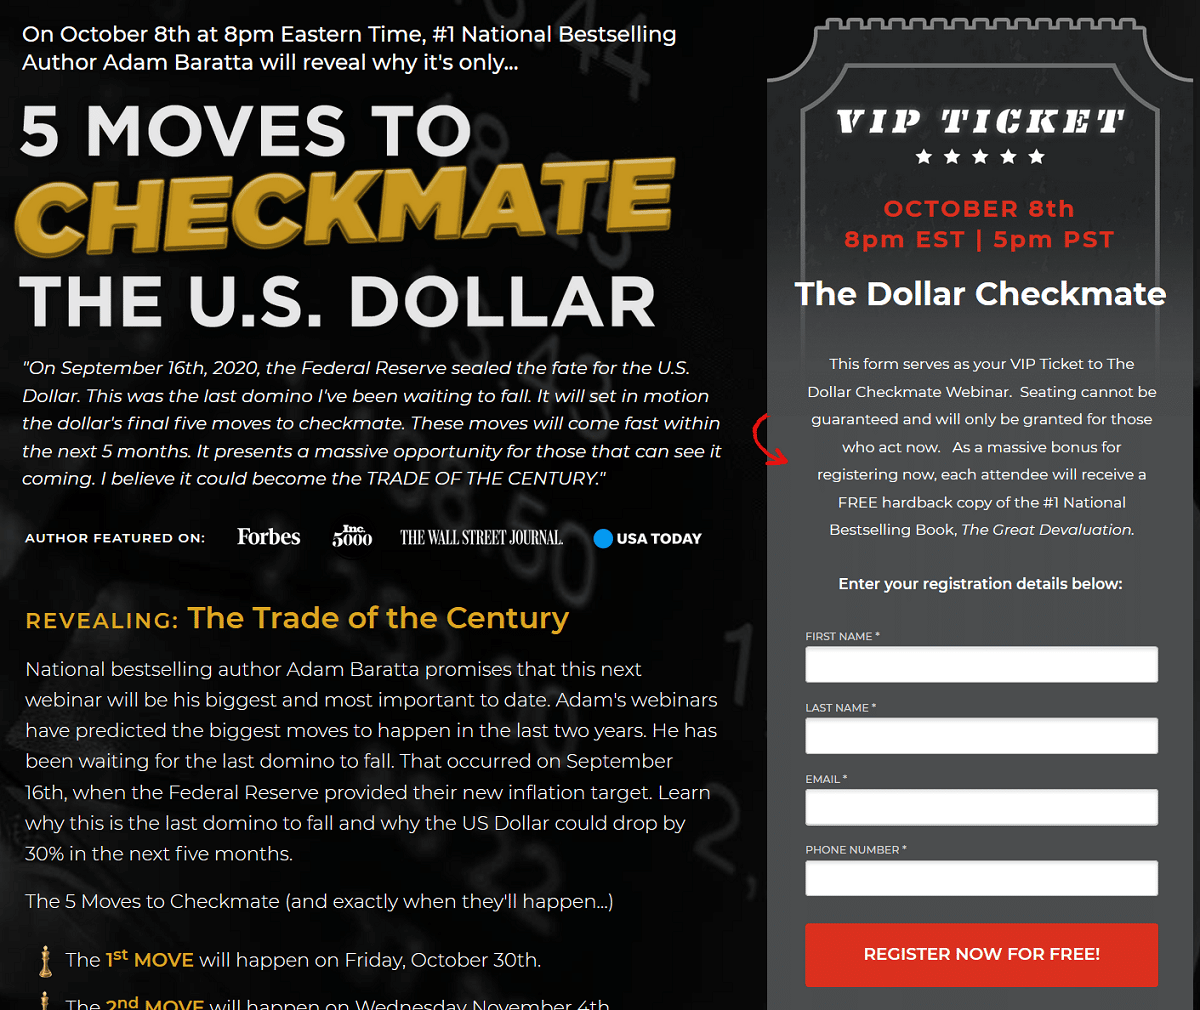 5 Moves to Checkmate the U.S. Dollar Summit